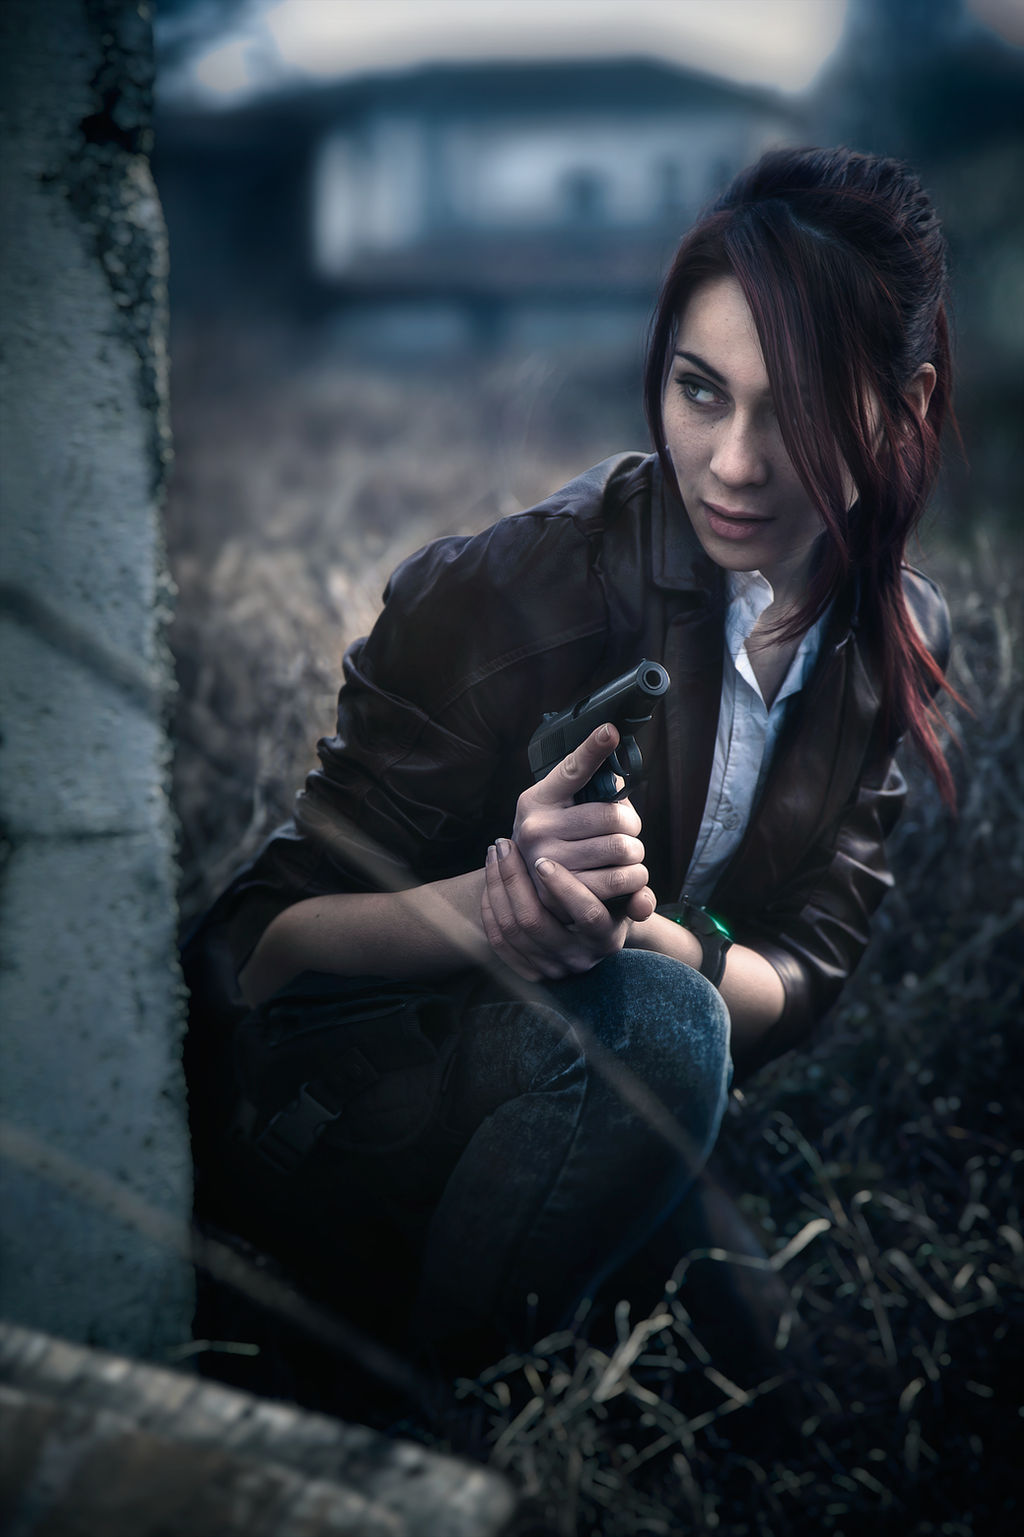 Claire Redfield - Resident Evil by Fin-Cosplay on DeviantArt